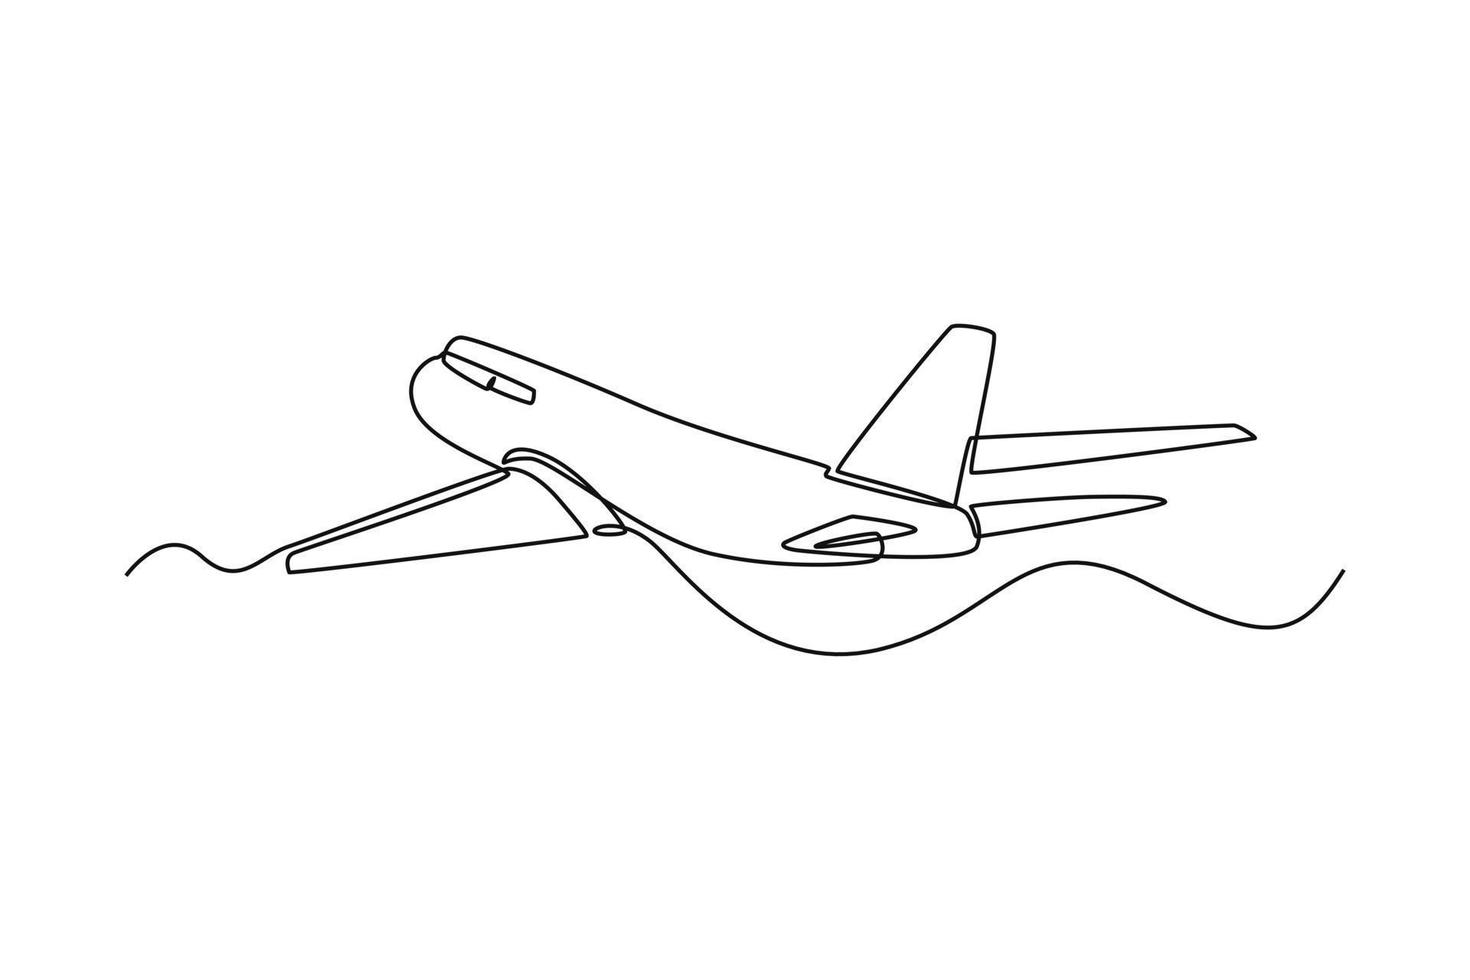 Single one line drawing airplane. Air transportation concept. Continuous line draw design graphic vector illustration.